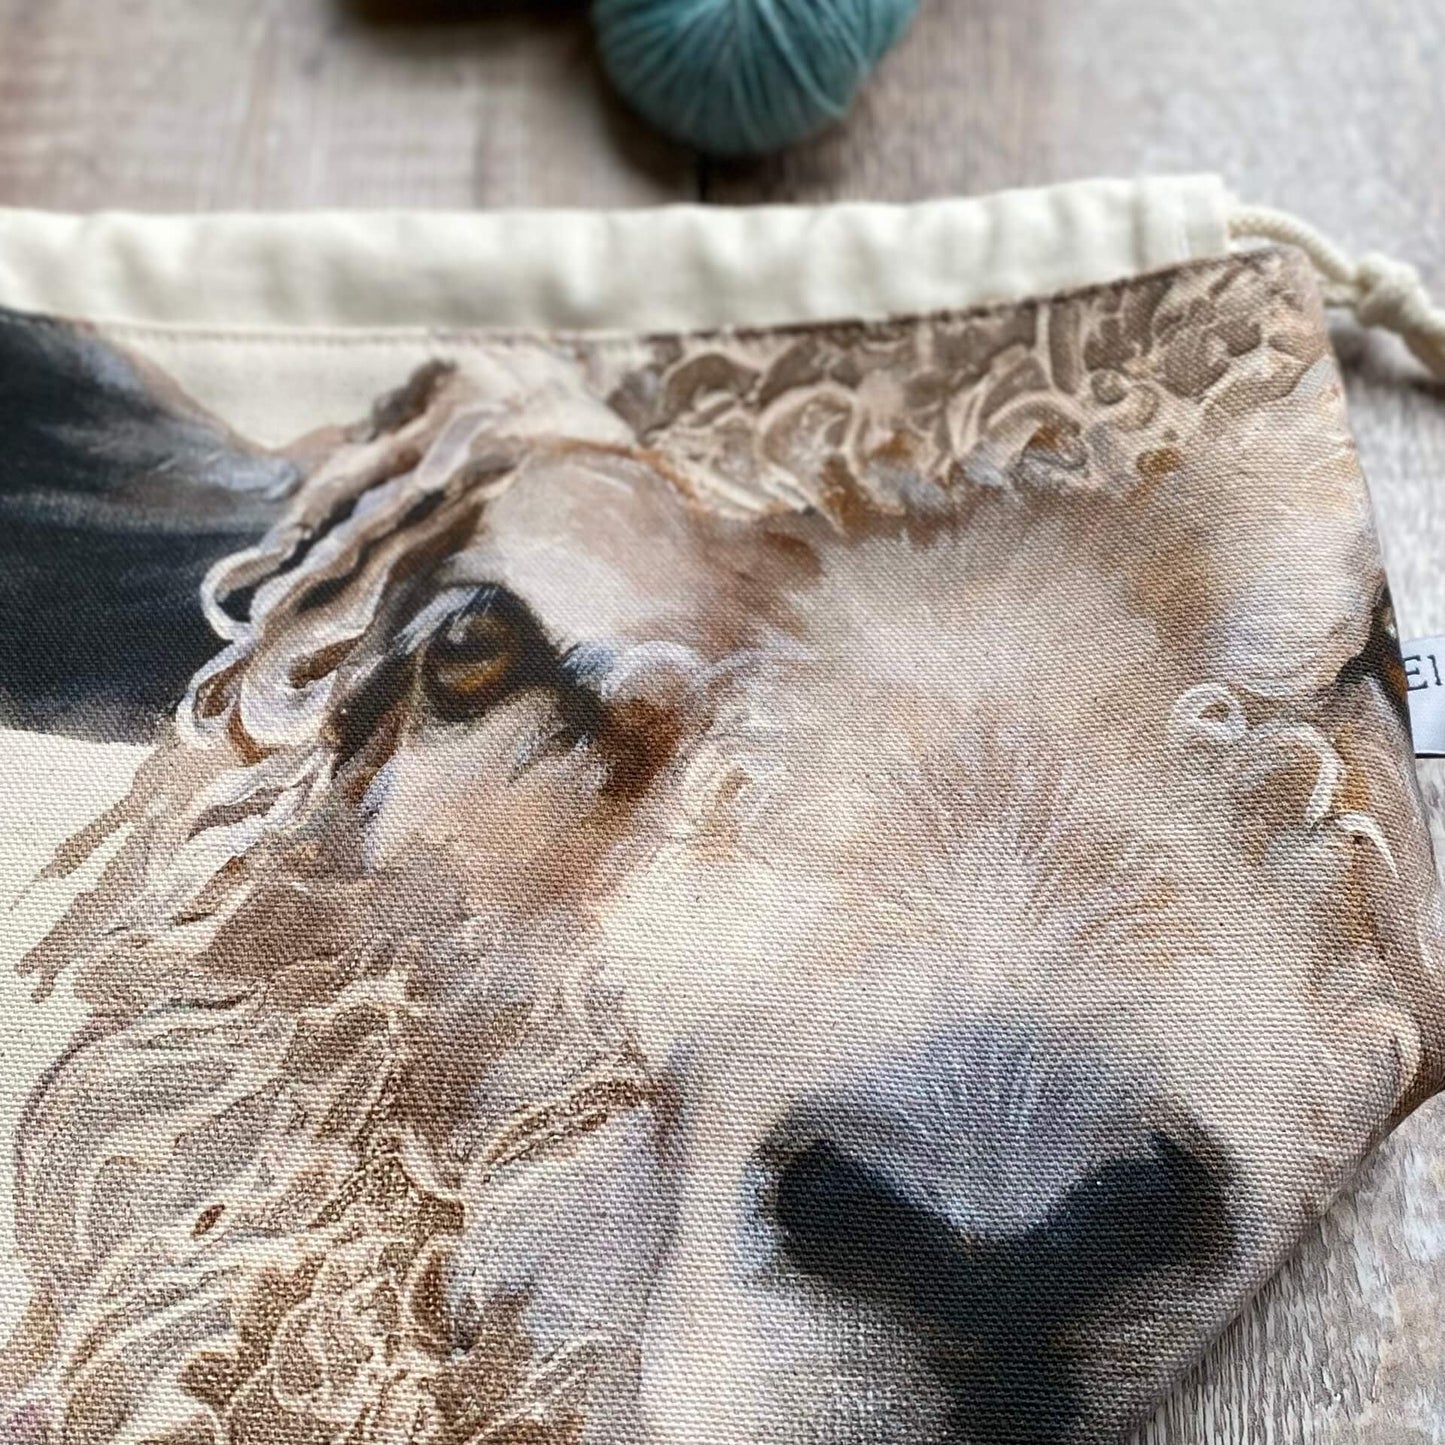 A close up of a knitting project bag lying on a wooden table next to some yarn. The project bag is made using a print featuring two sheep faces. 